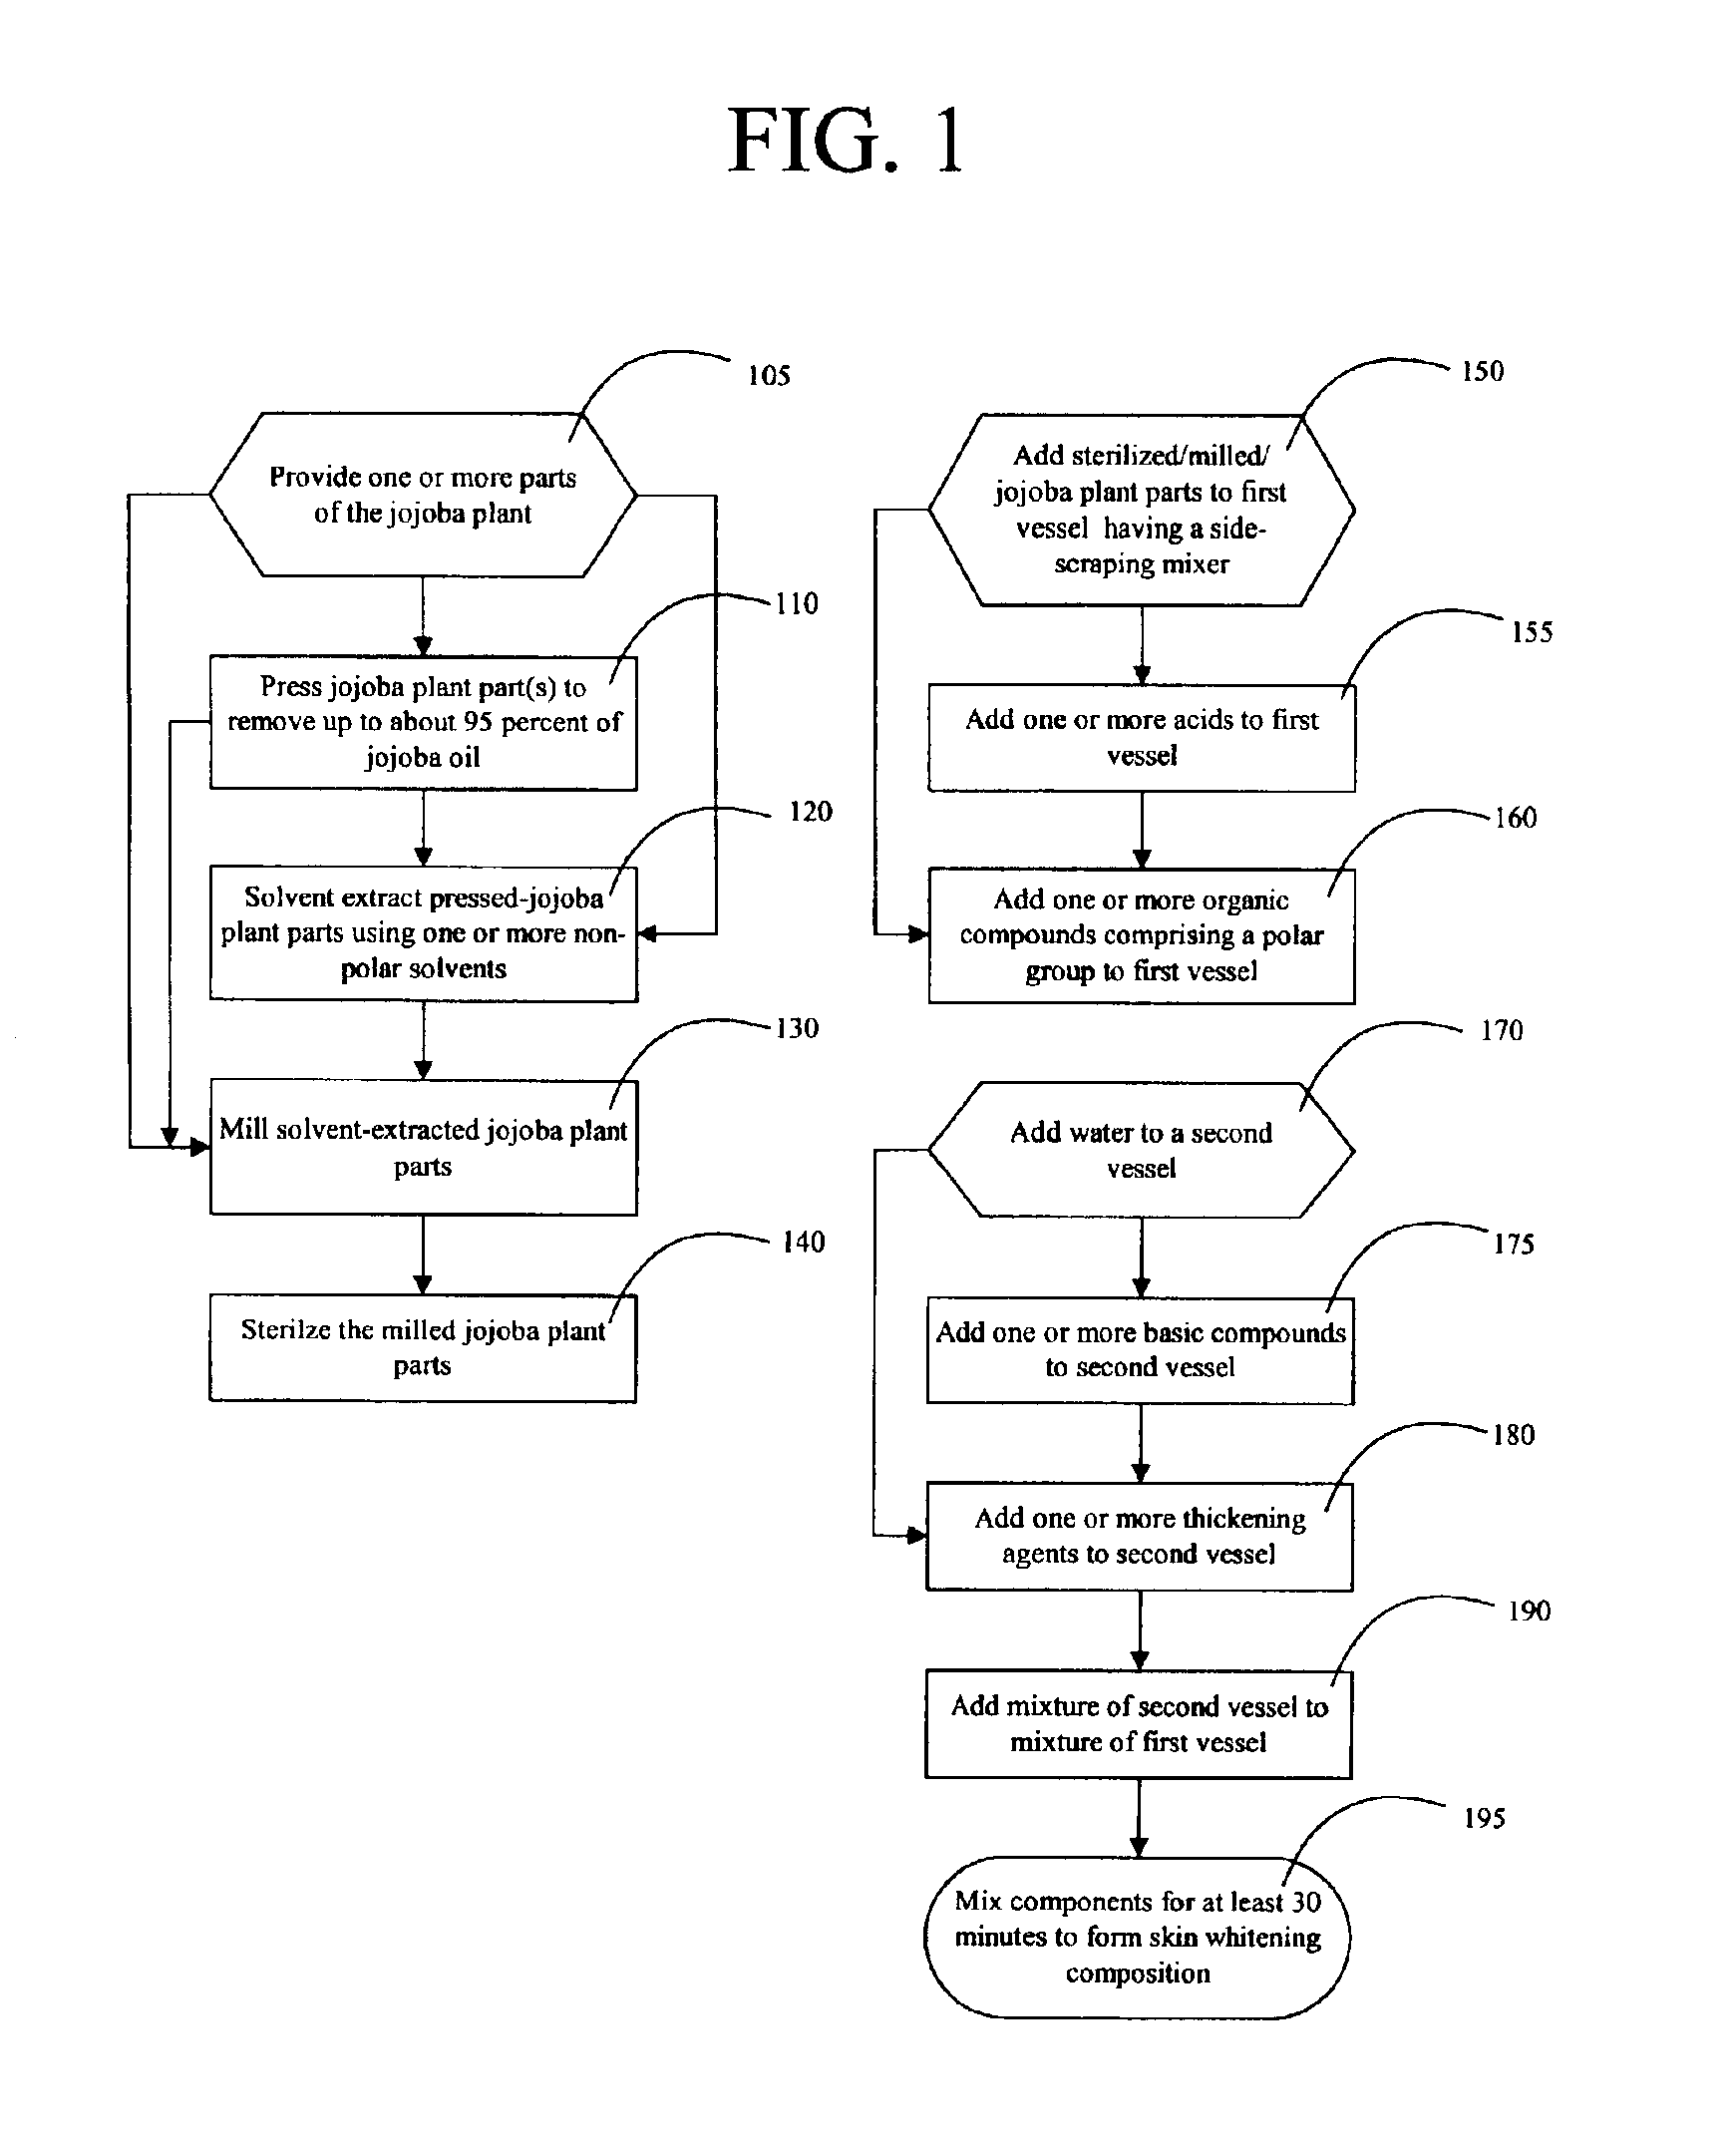 Composition and method to whiten and exfoliate skin